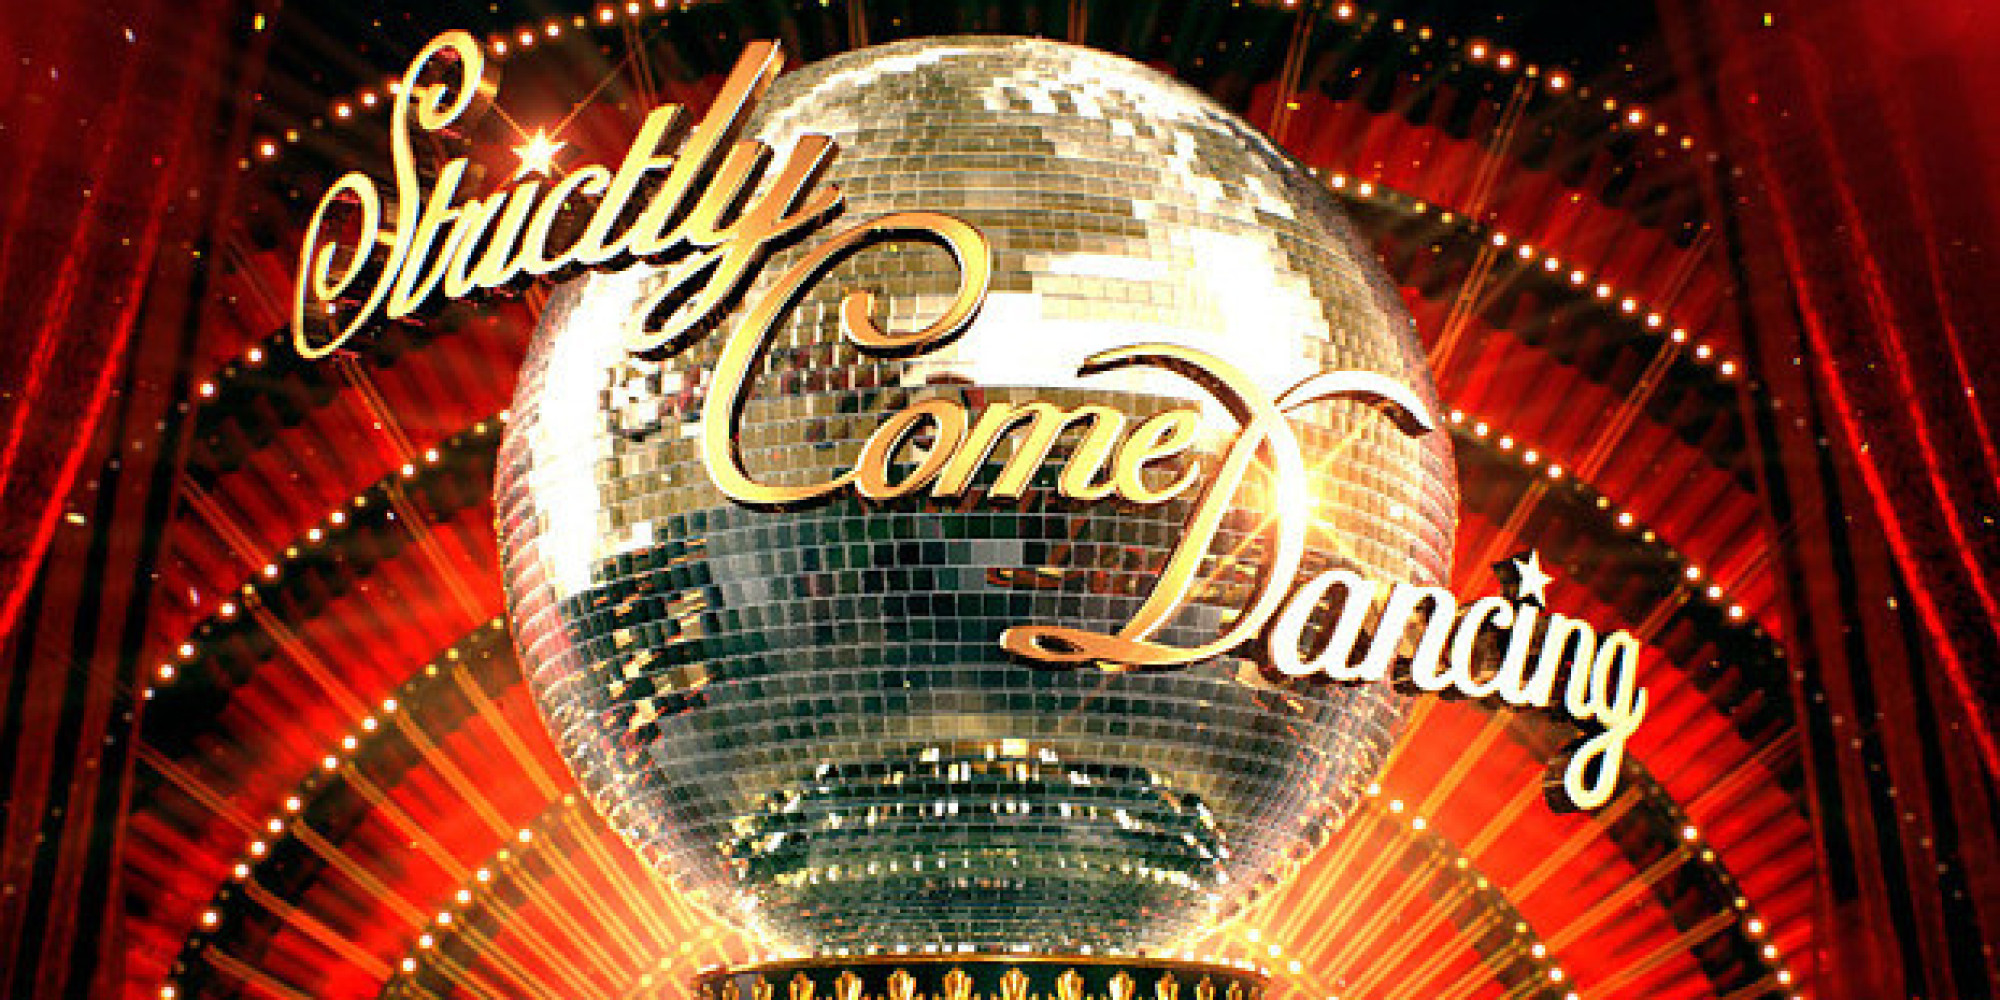 strictly come dancing - photo #24